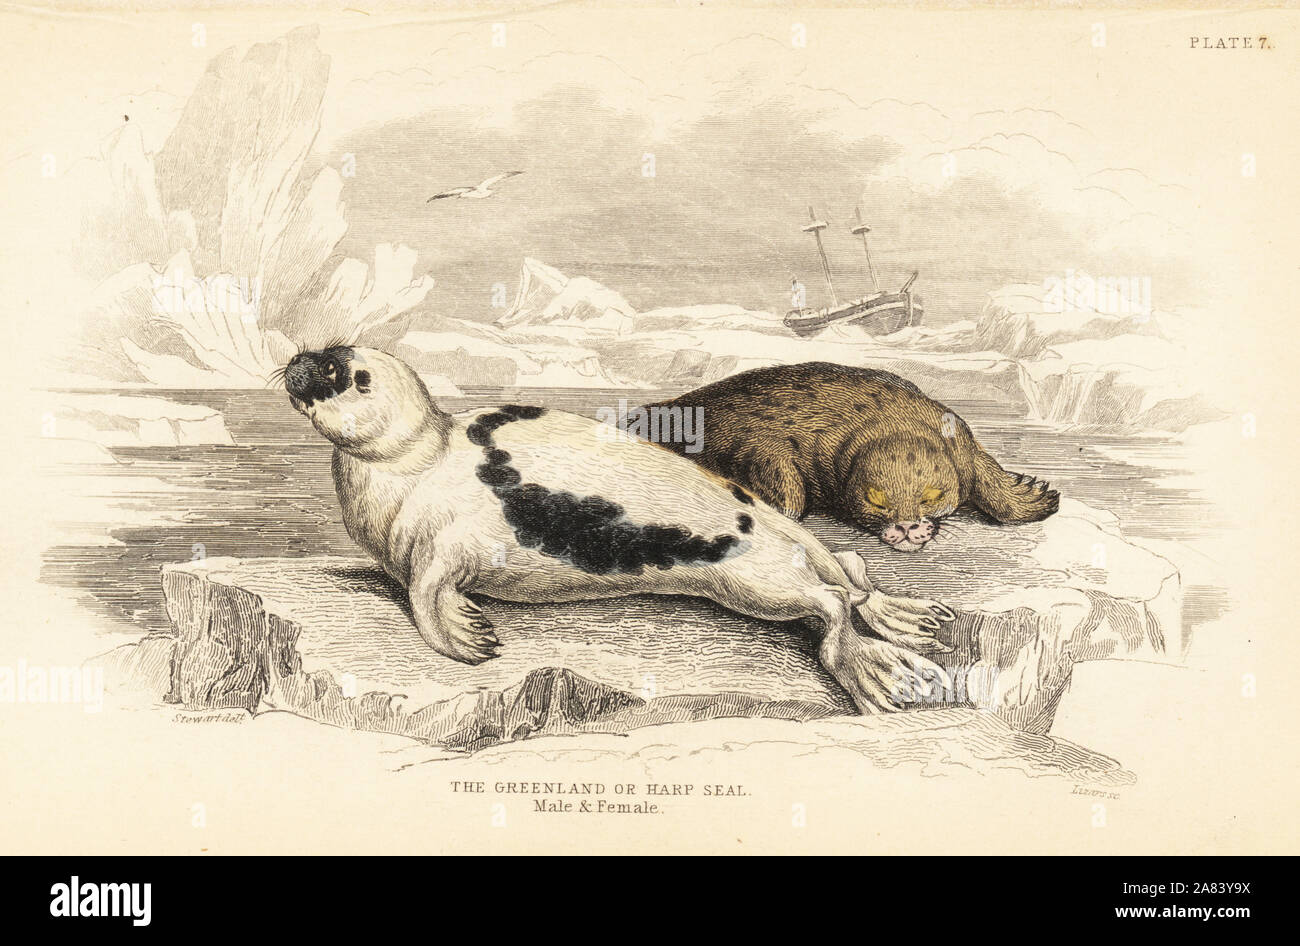 Greenland or harp seal, male and female, Pagophilus groenlandicus. Handcoloured steel engraving by W.H. Lizars after an illustration by James Stewart from Robert Hamilton's Amphibious Carnivora, part of Sir William Jardine's Naturalist's Library: Mammalia, Edinburgh, 1839. Stock Photo